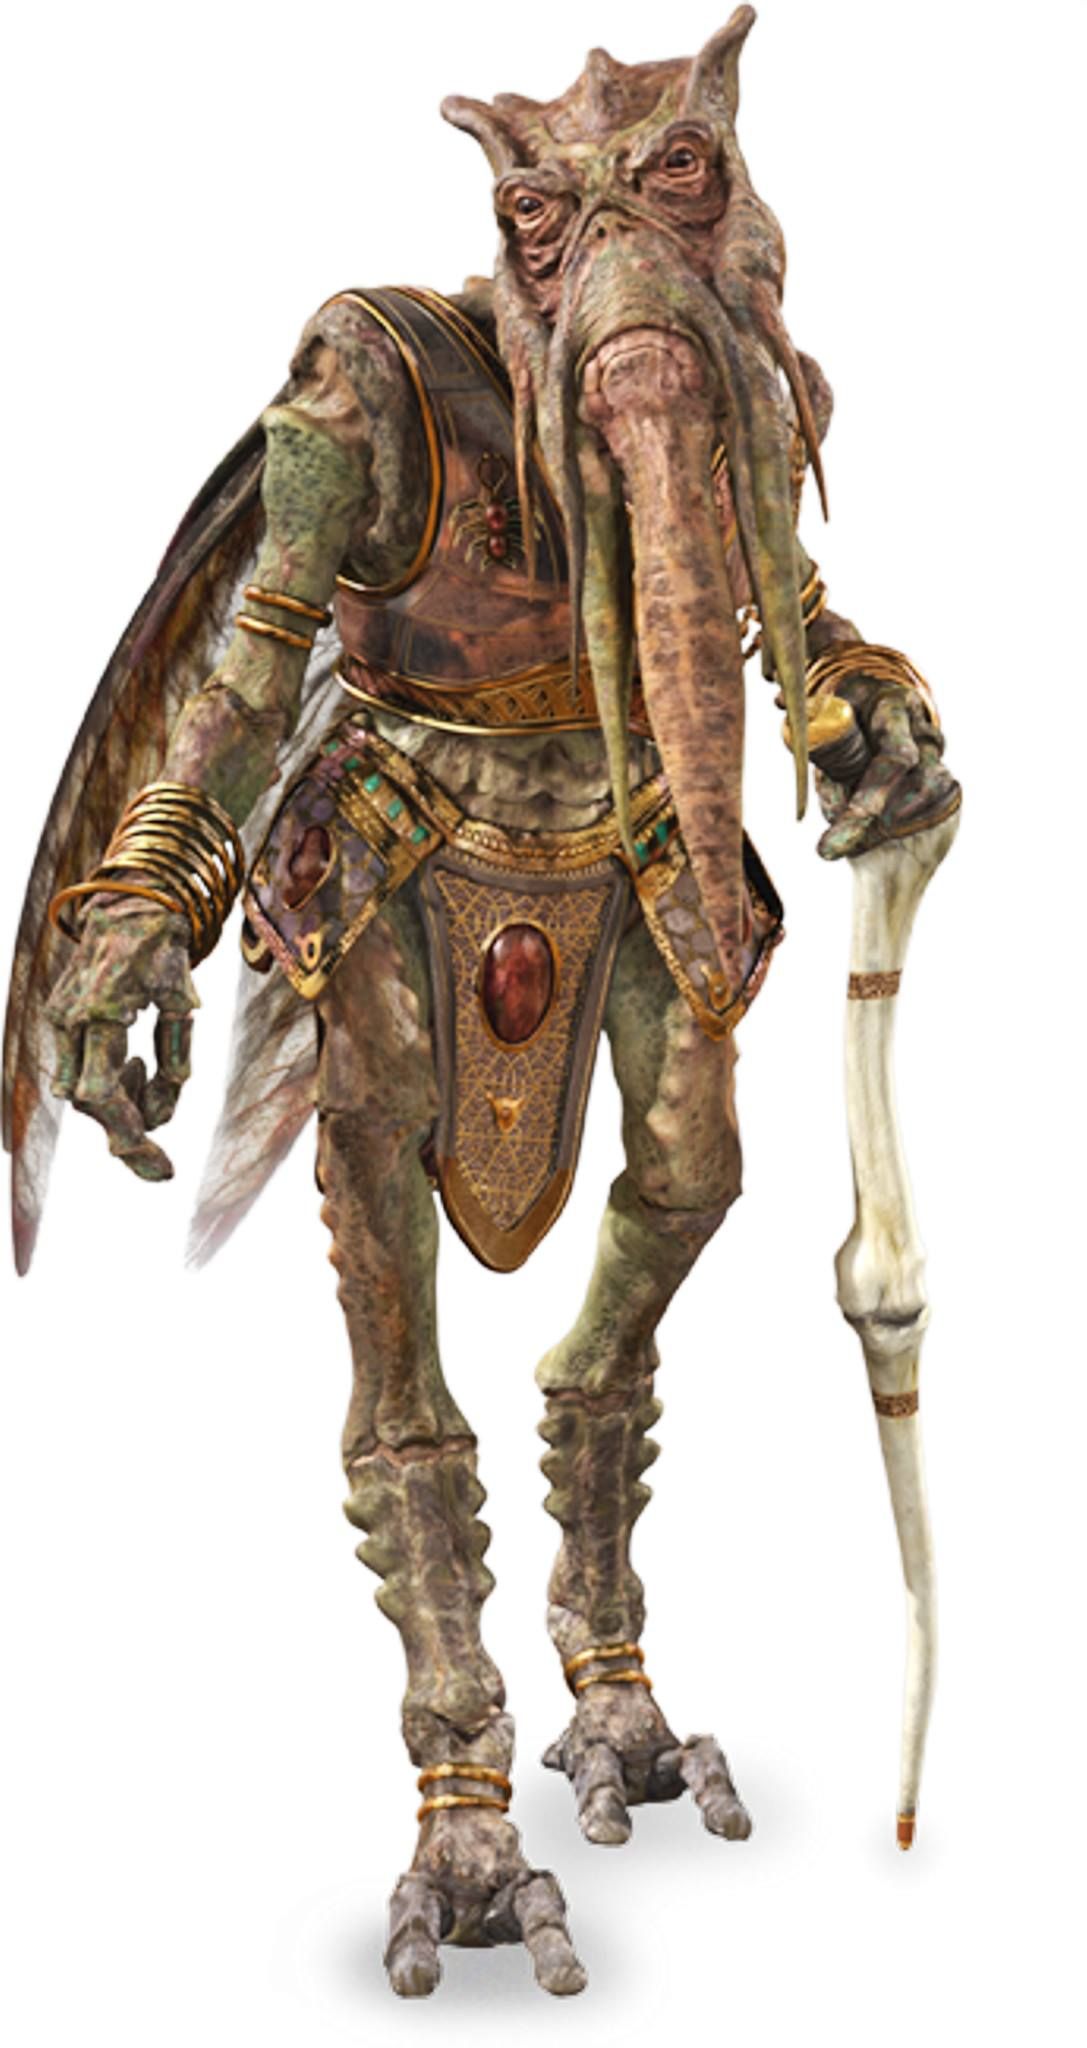 MidweekPedia POGGLE the LESSER / Leader of the Geonosians DESCRIPTION: was the Archduke of Geonosis before. Star wars species, Star wars trooper, Star wars rpg